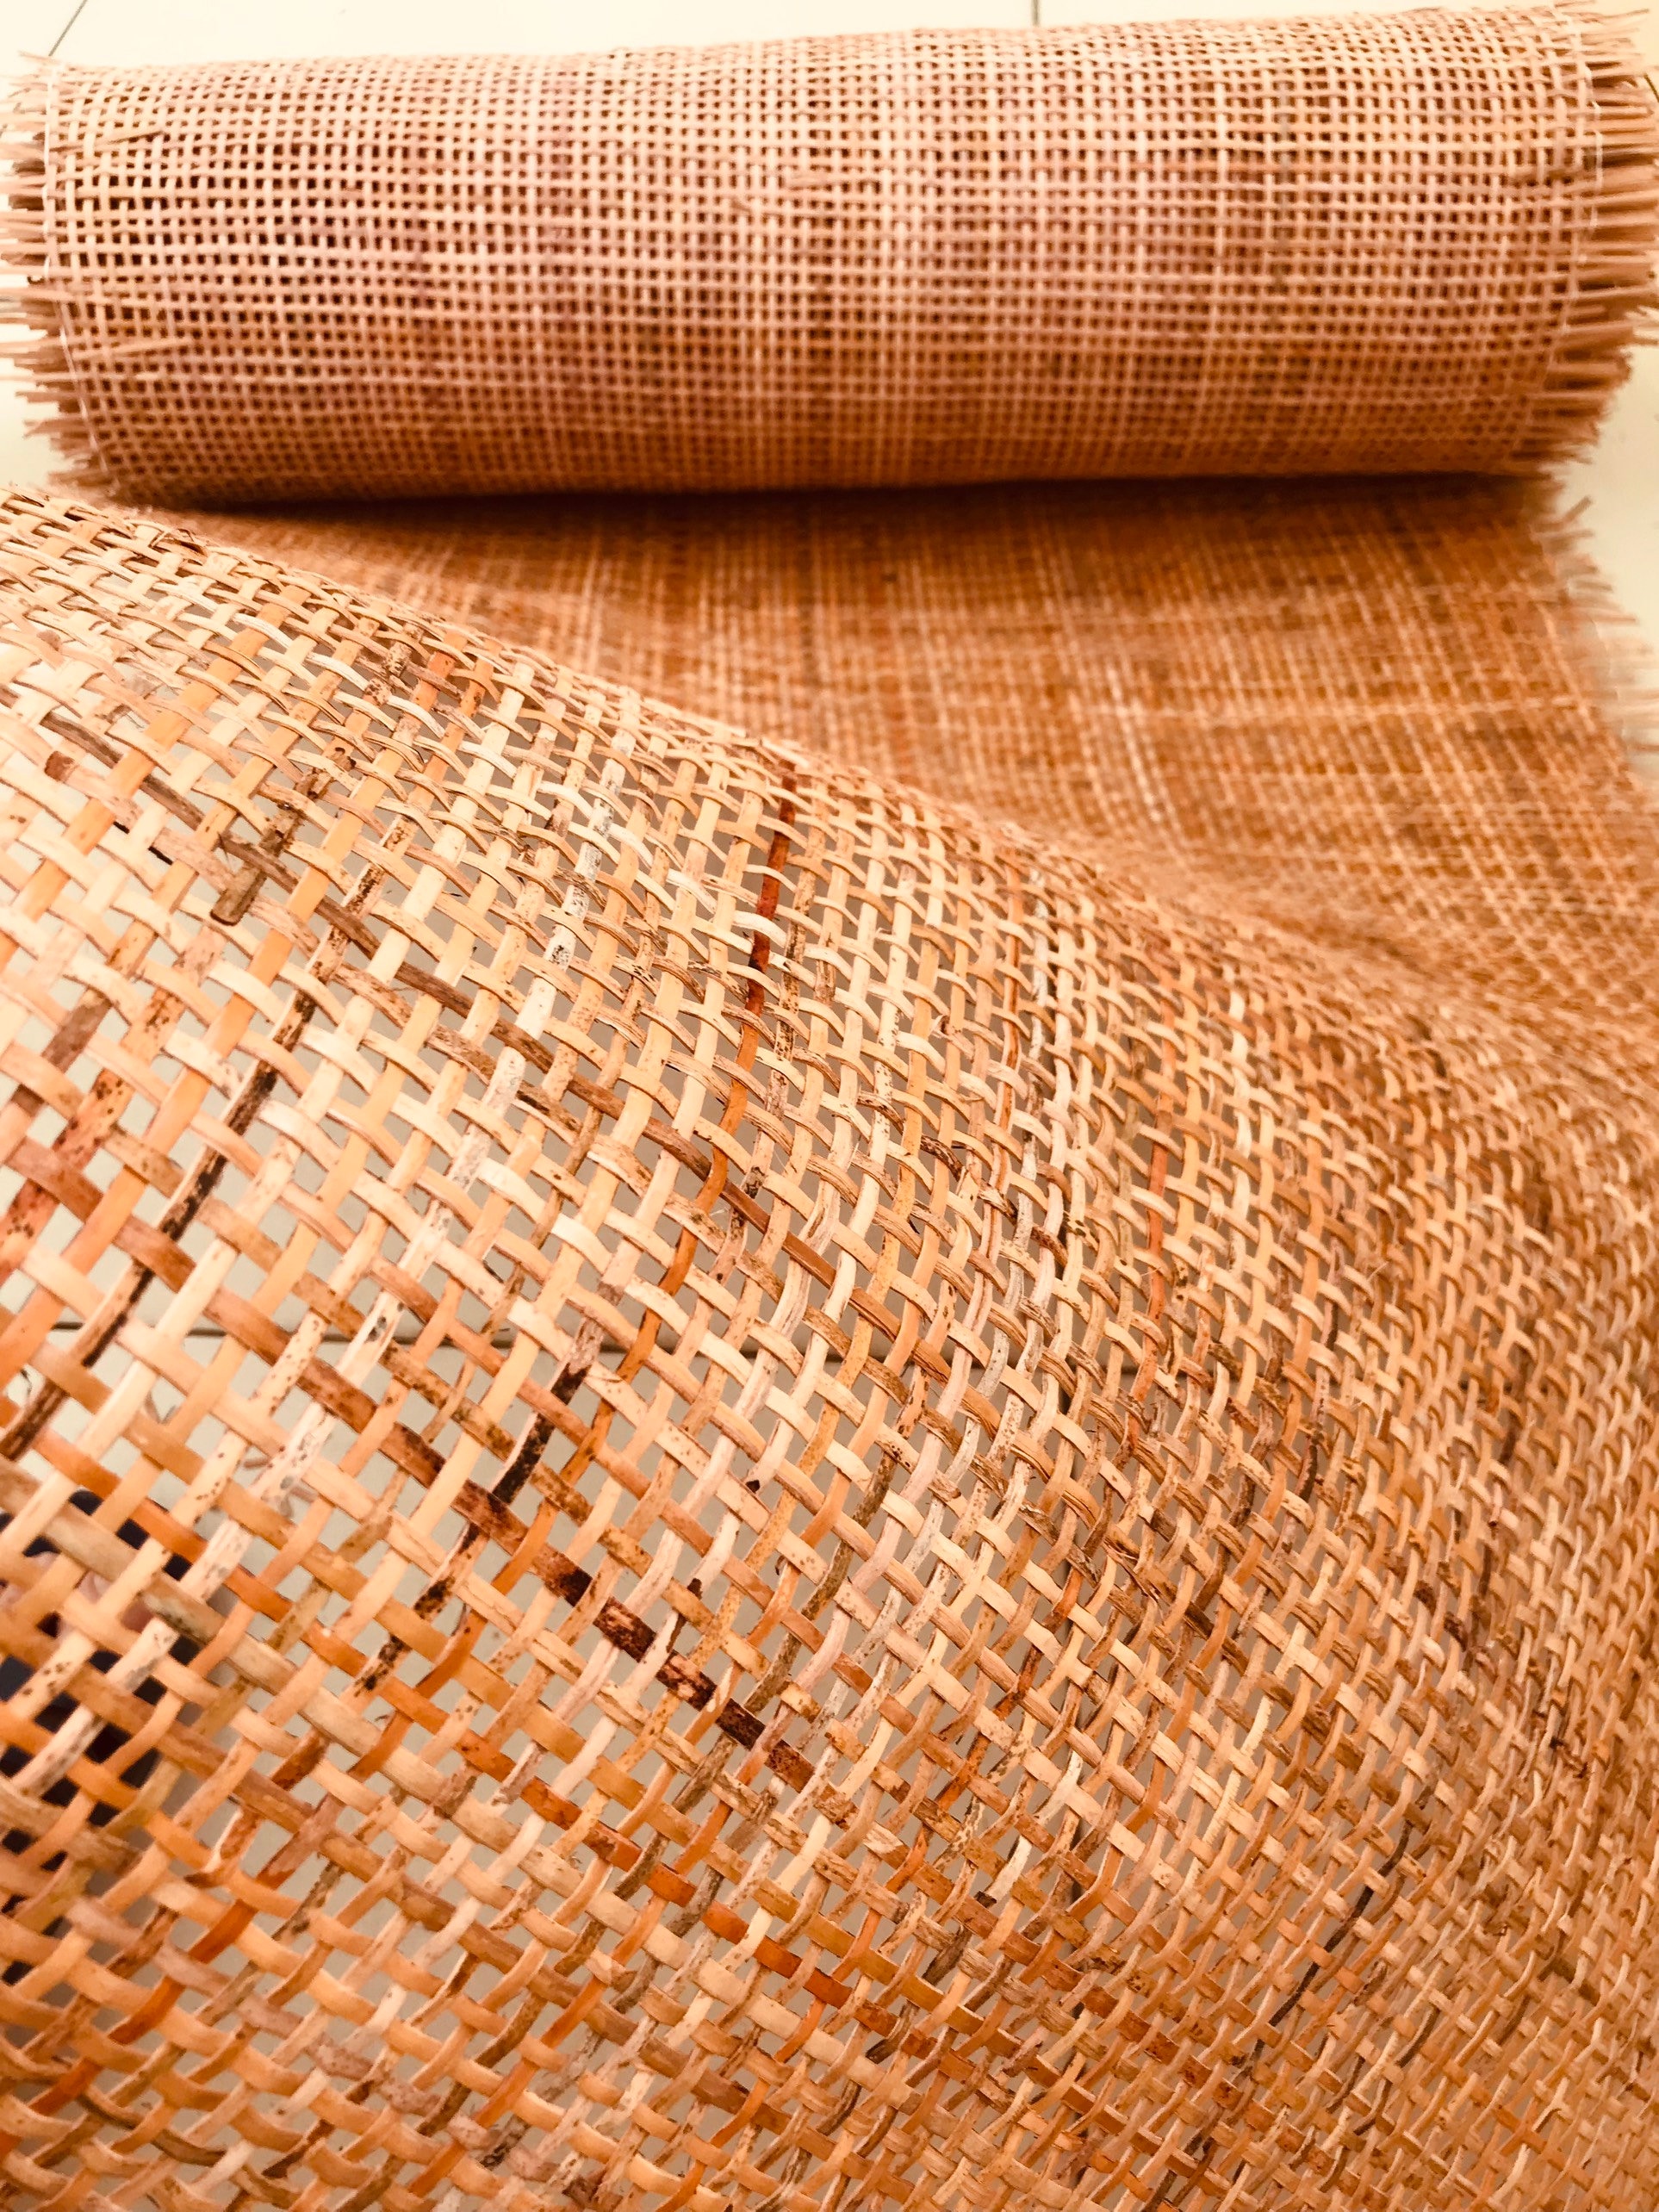 WIDTH 18 Dark Natural Radio Rattan Cane Mesh Webbing Roll/caning Material  for Cane Furniture, Restoration and DIY Project Cut to Feet 